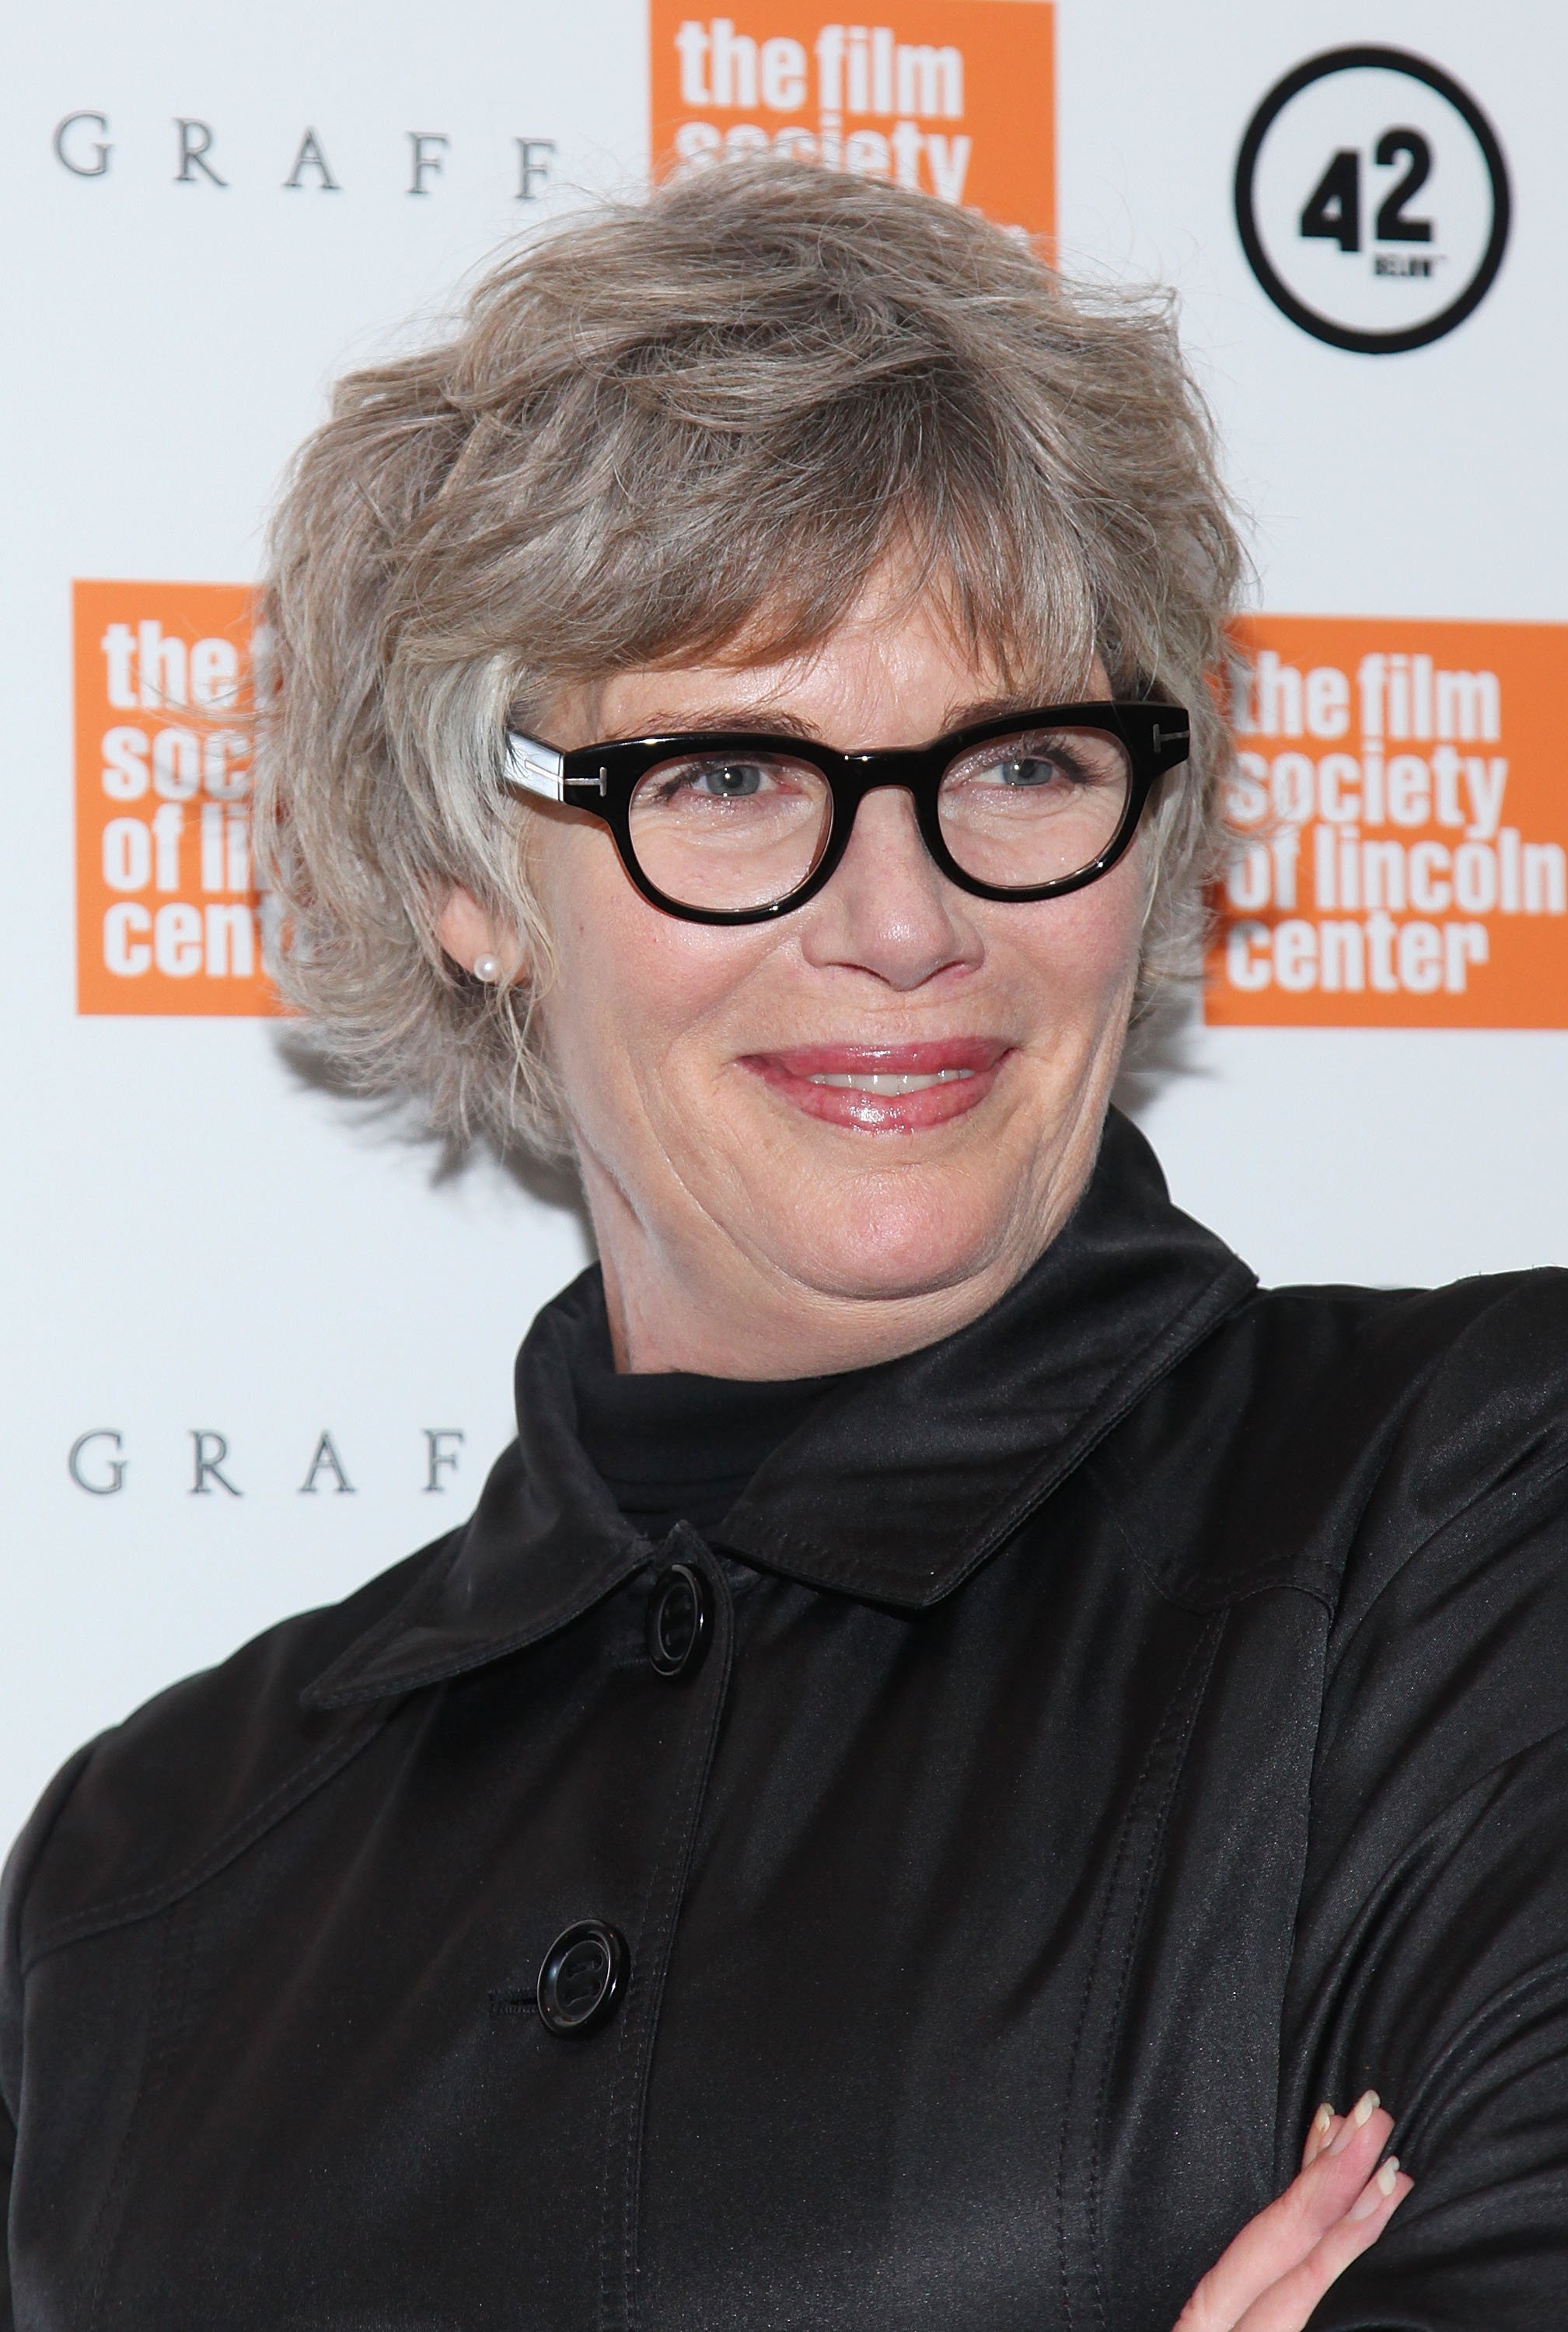 Actress Kelly McGillis attends the "Stake Land" premiere at The Film Society of Lincoln Center on October 27, 2010 in New York City | Source: Getty Images